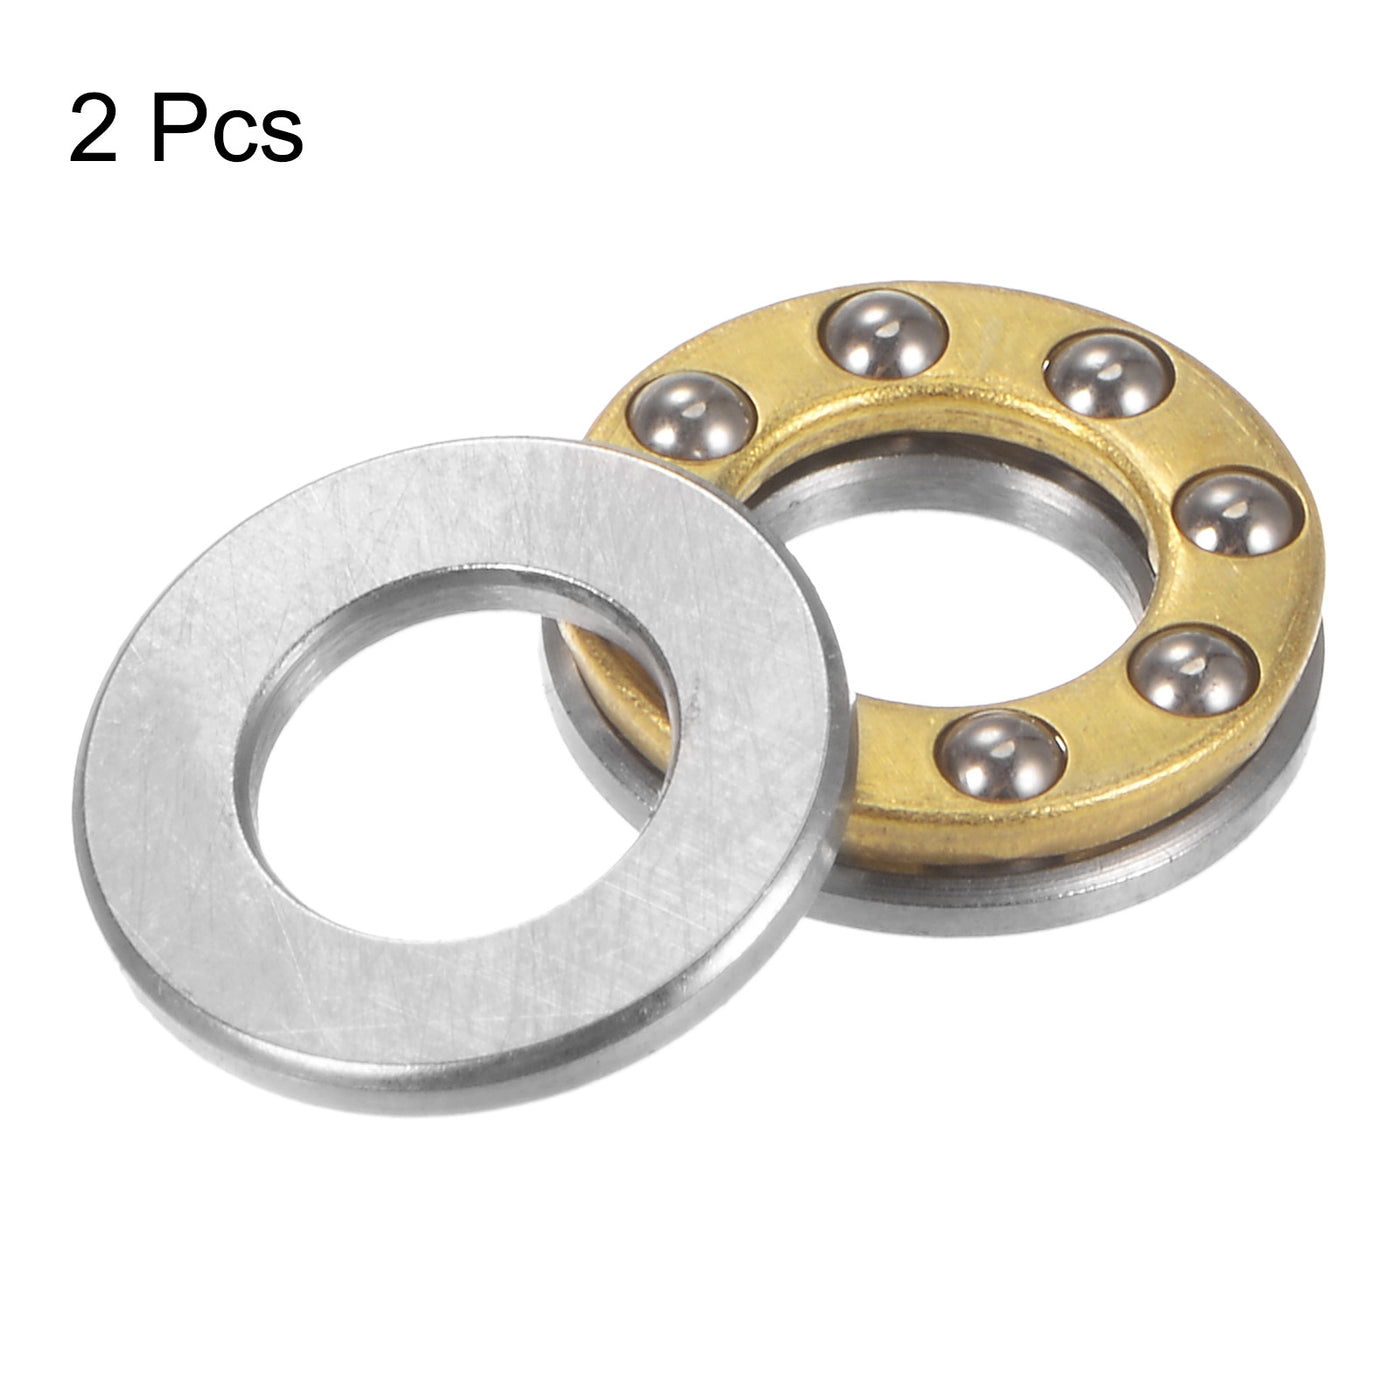 uxcell Uxcell F7-13M Thrust Ball Bearing 7x13x5mm Brass with Washers ABEC3 2pcs